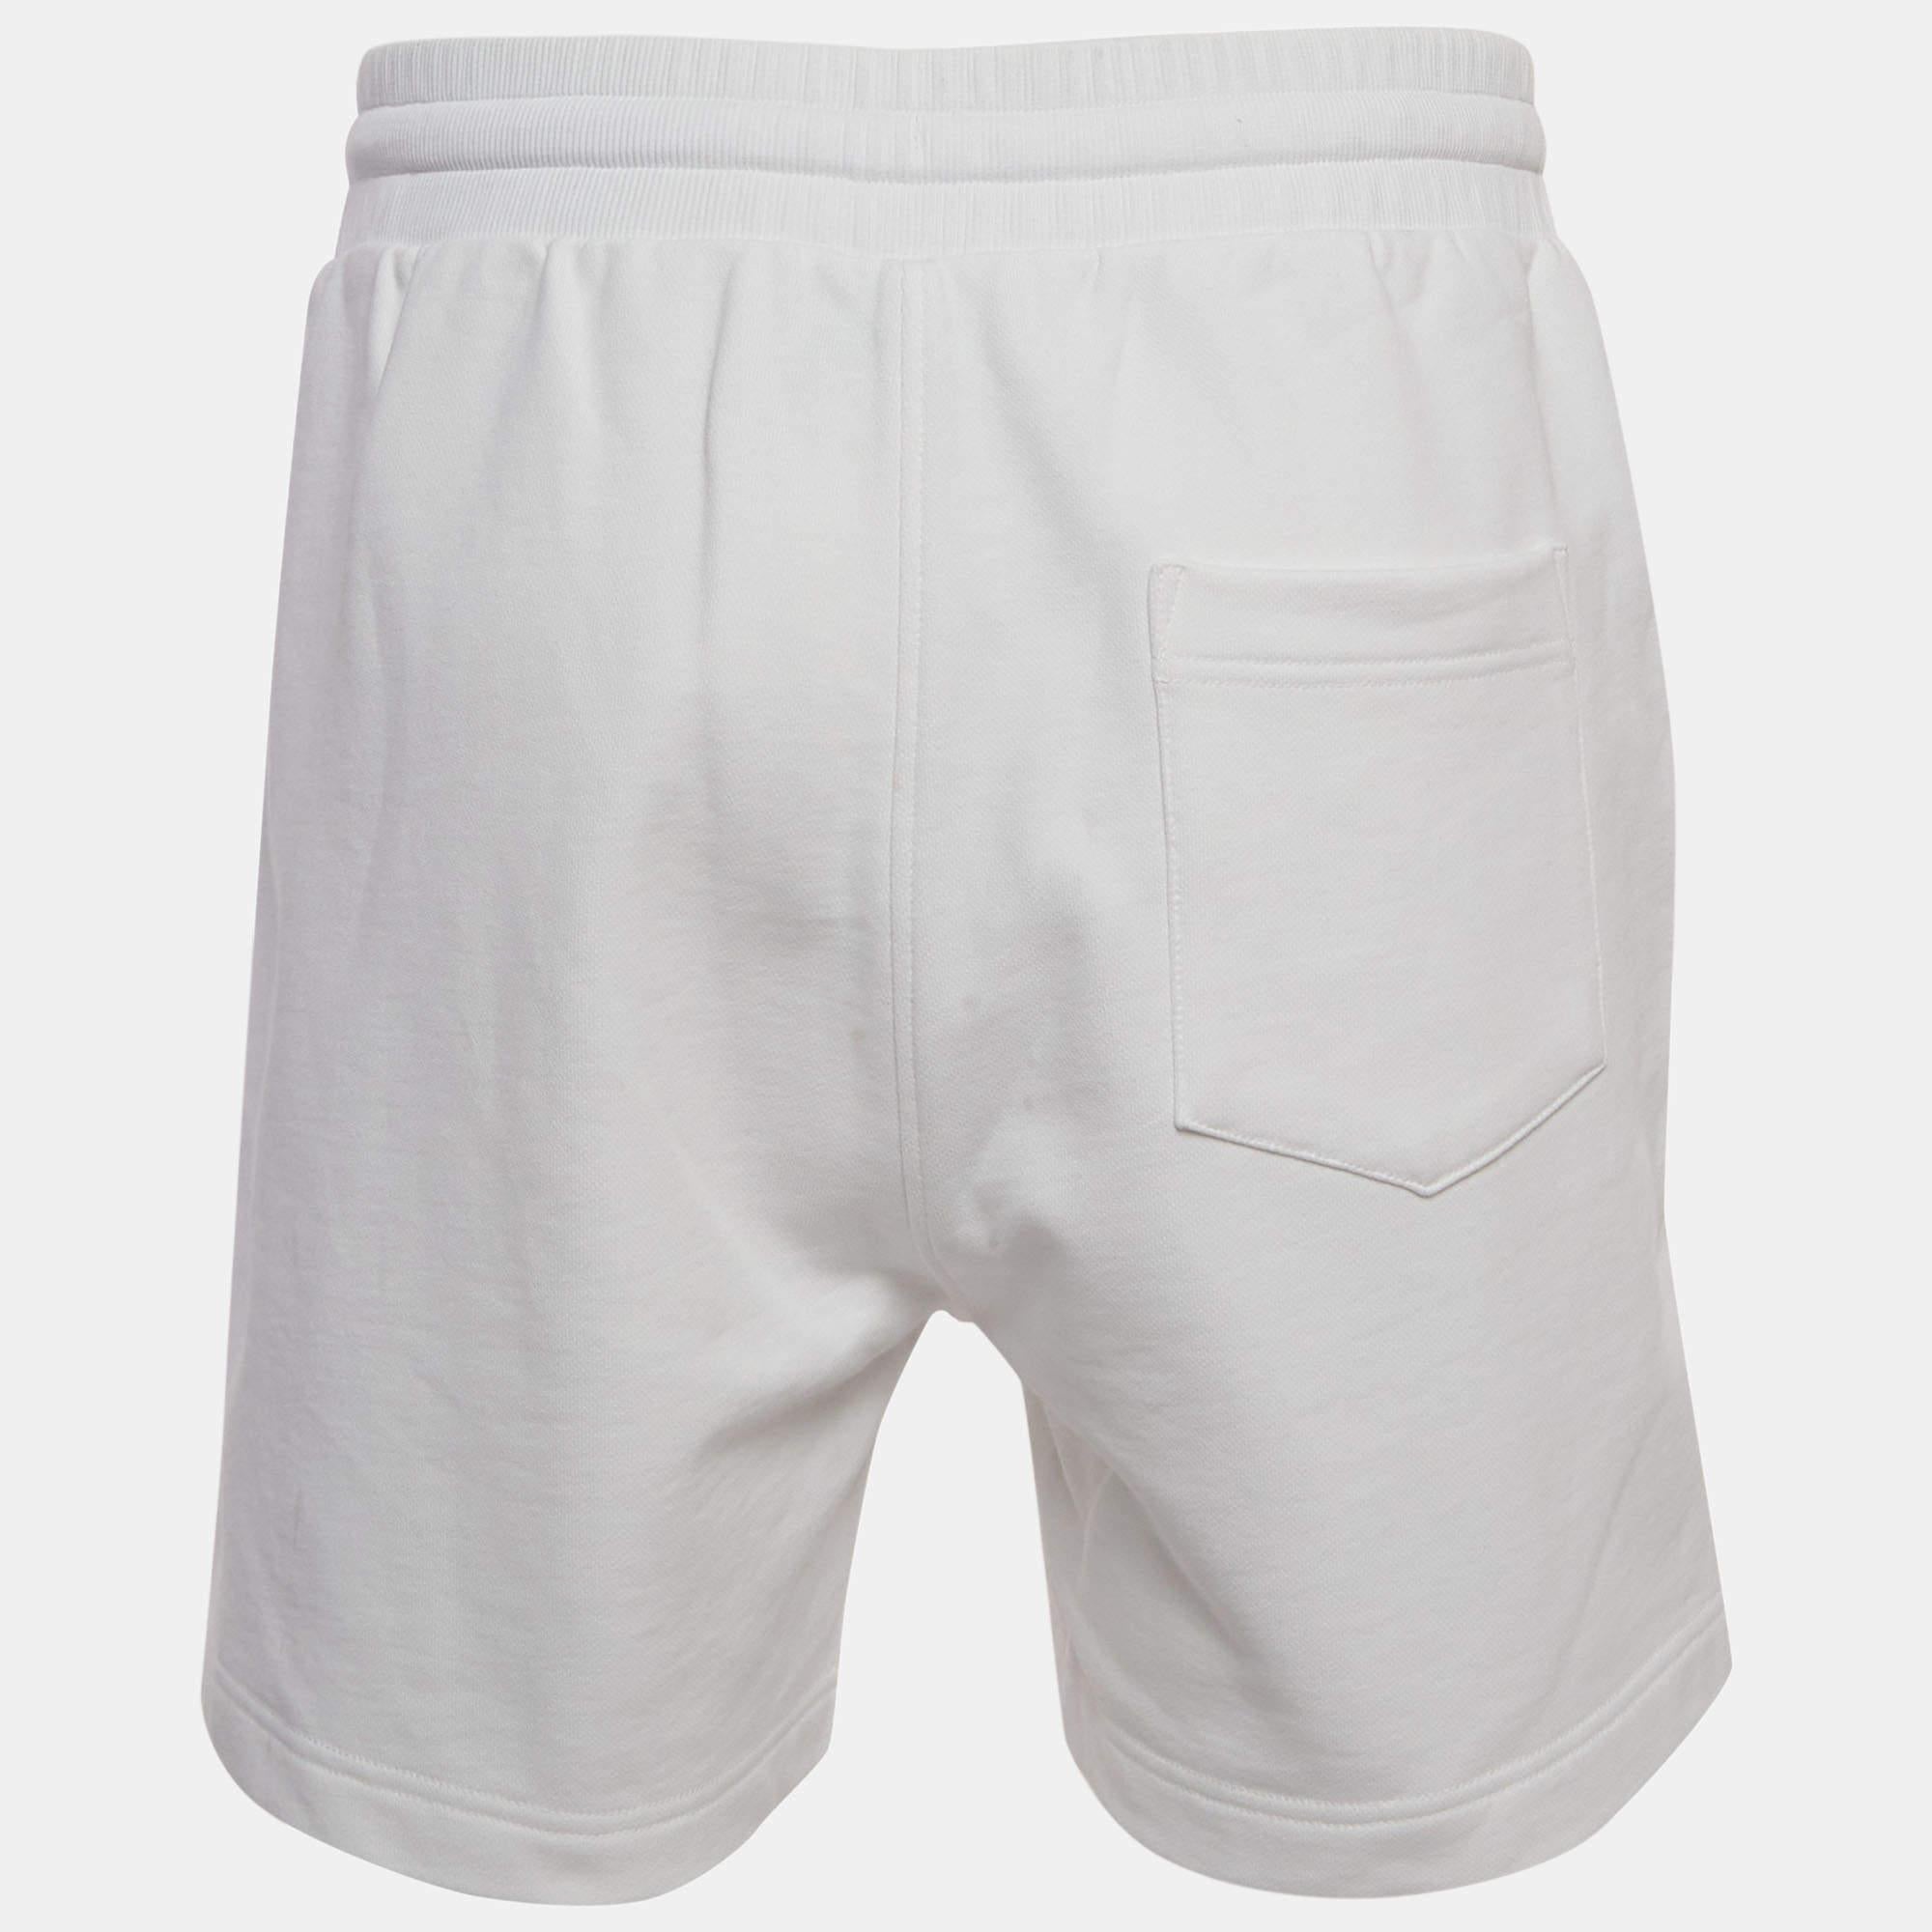 Casablanca's sweat shorts effortlessly blend comfort and style. Crafted from premium cotton, these shorts feature a distinctive 3D logo print, adding a modern touch. The drawstring waist ensures a customizable fit, making them perfect for casual